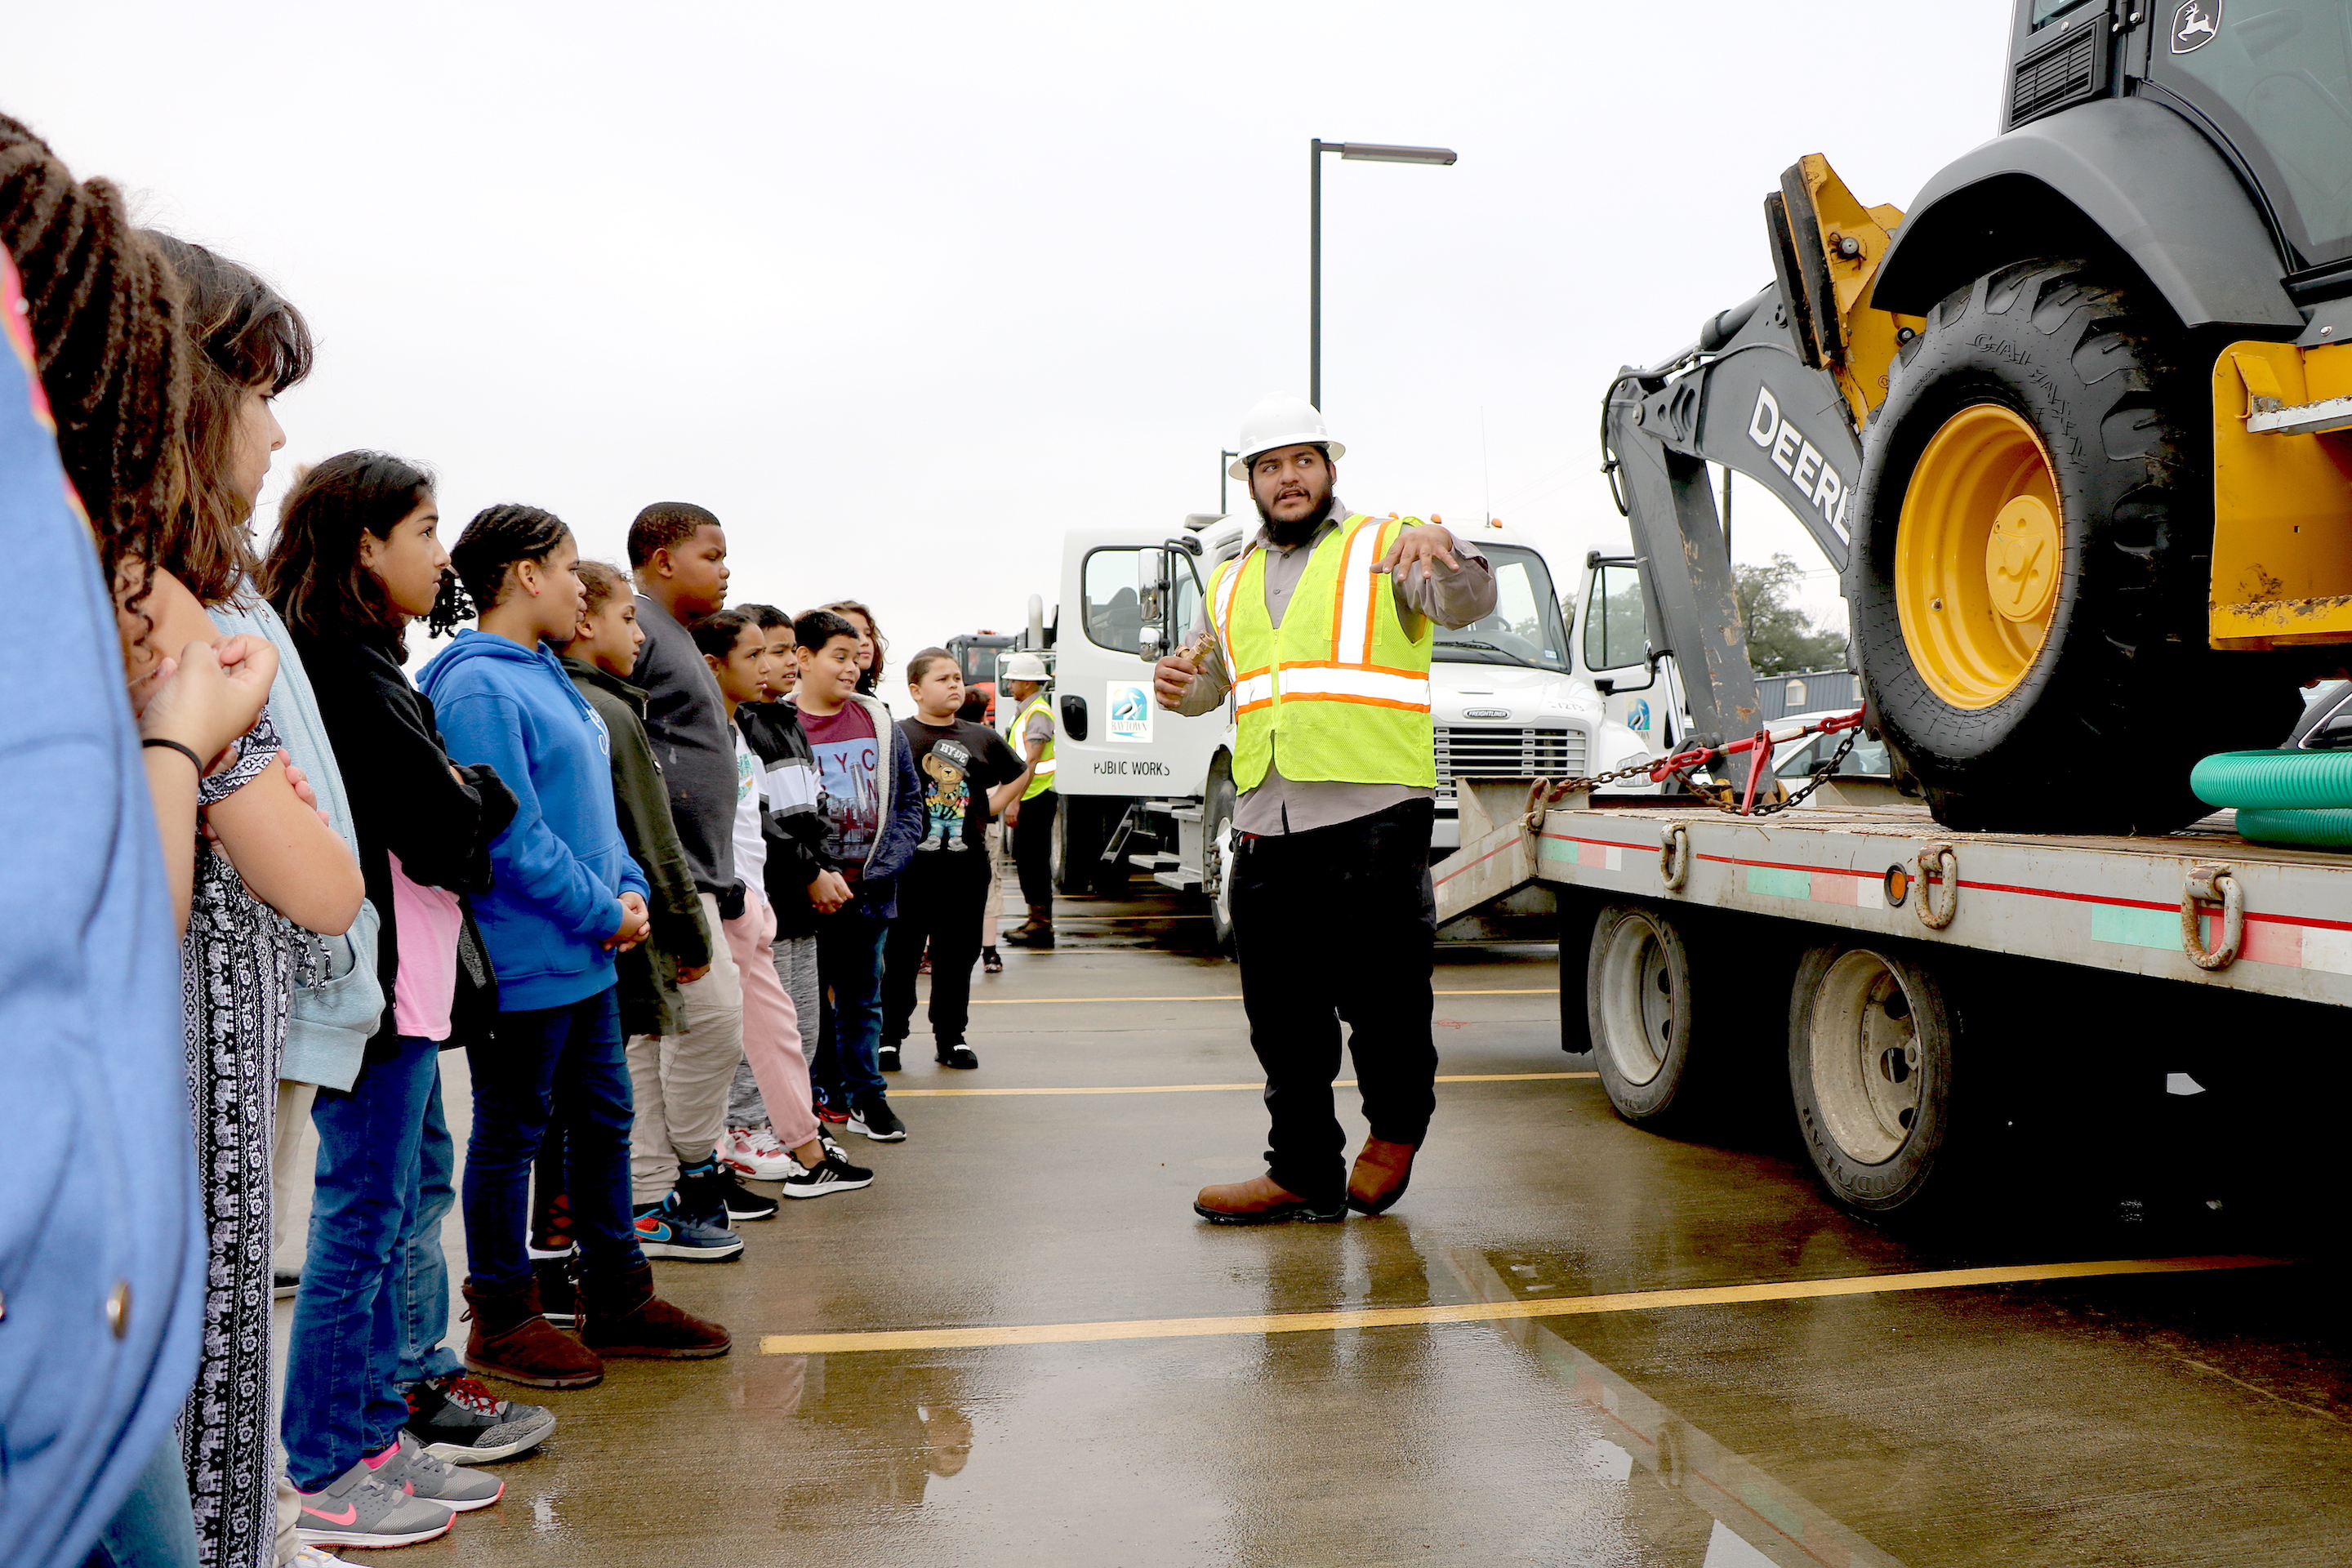 Students listen to city worker talk about equipment.